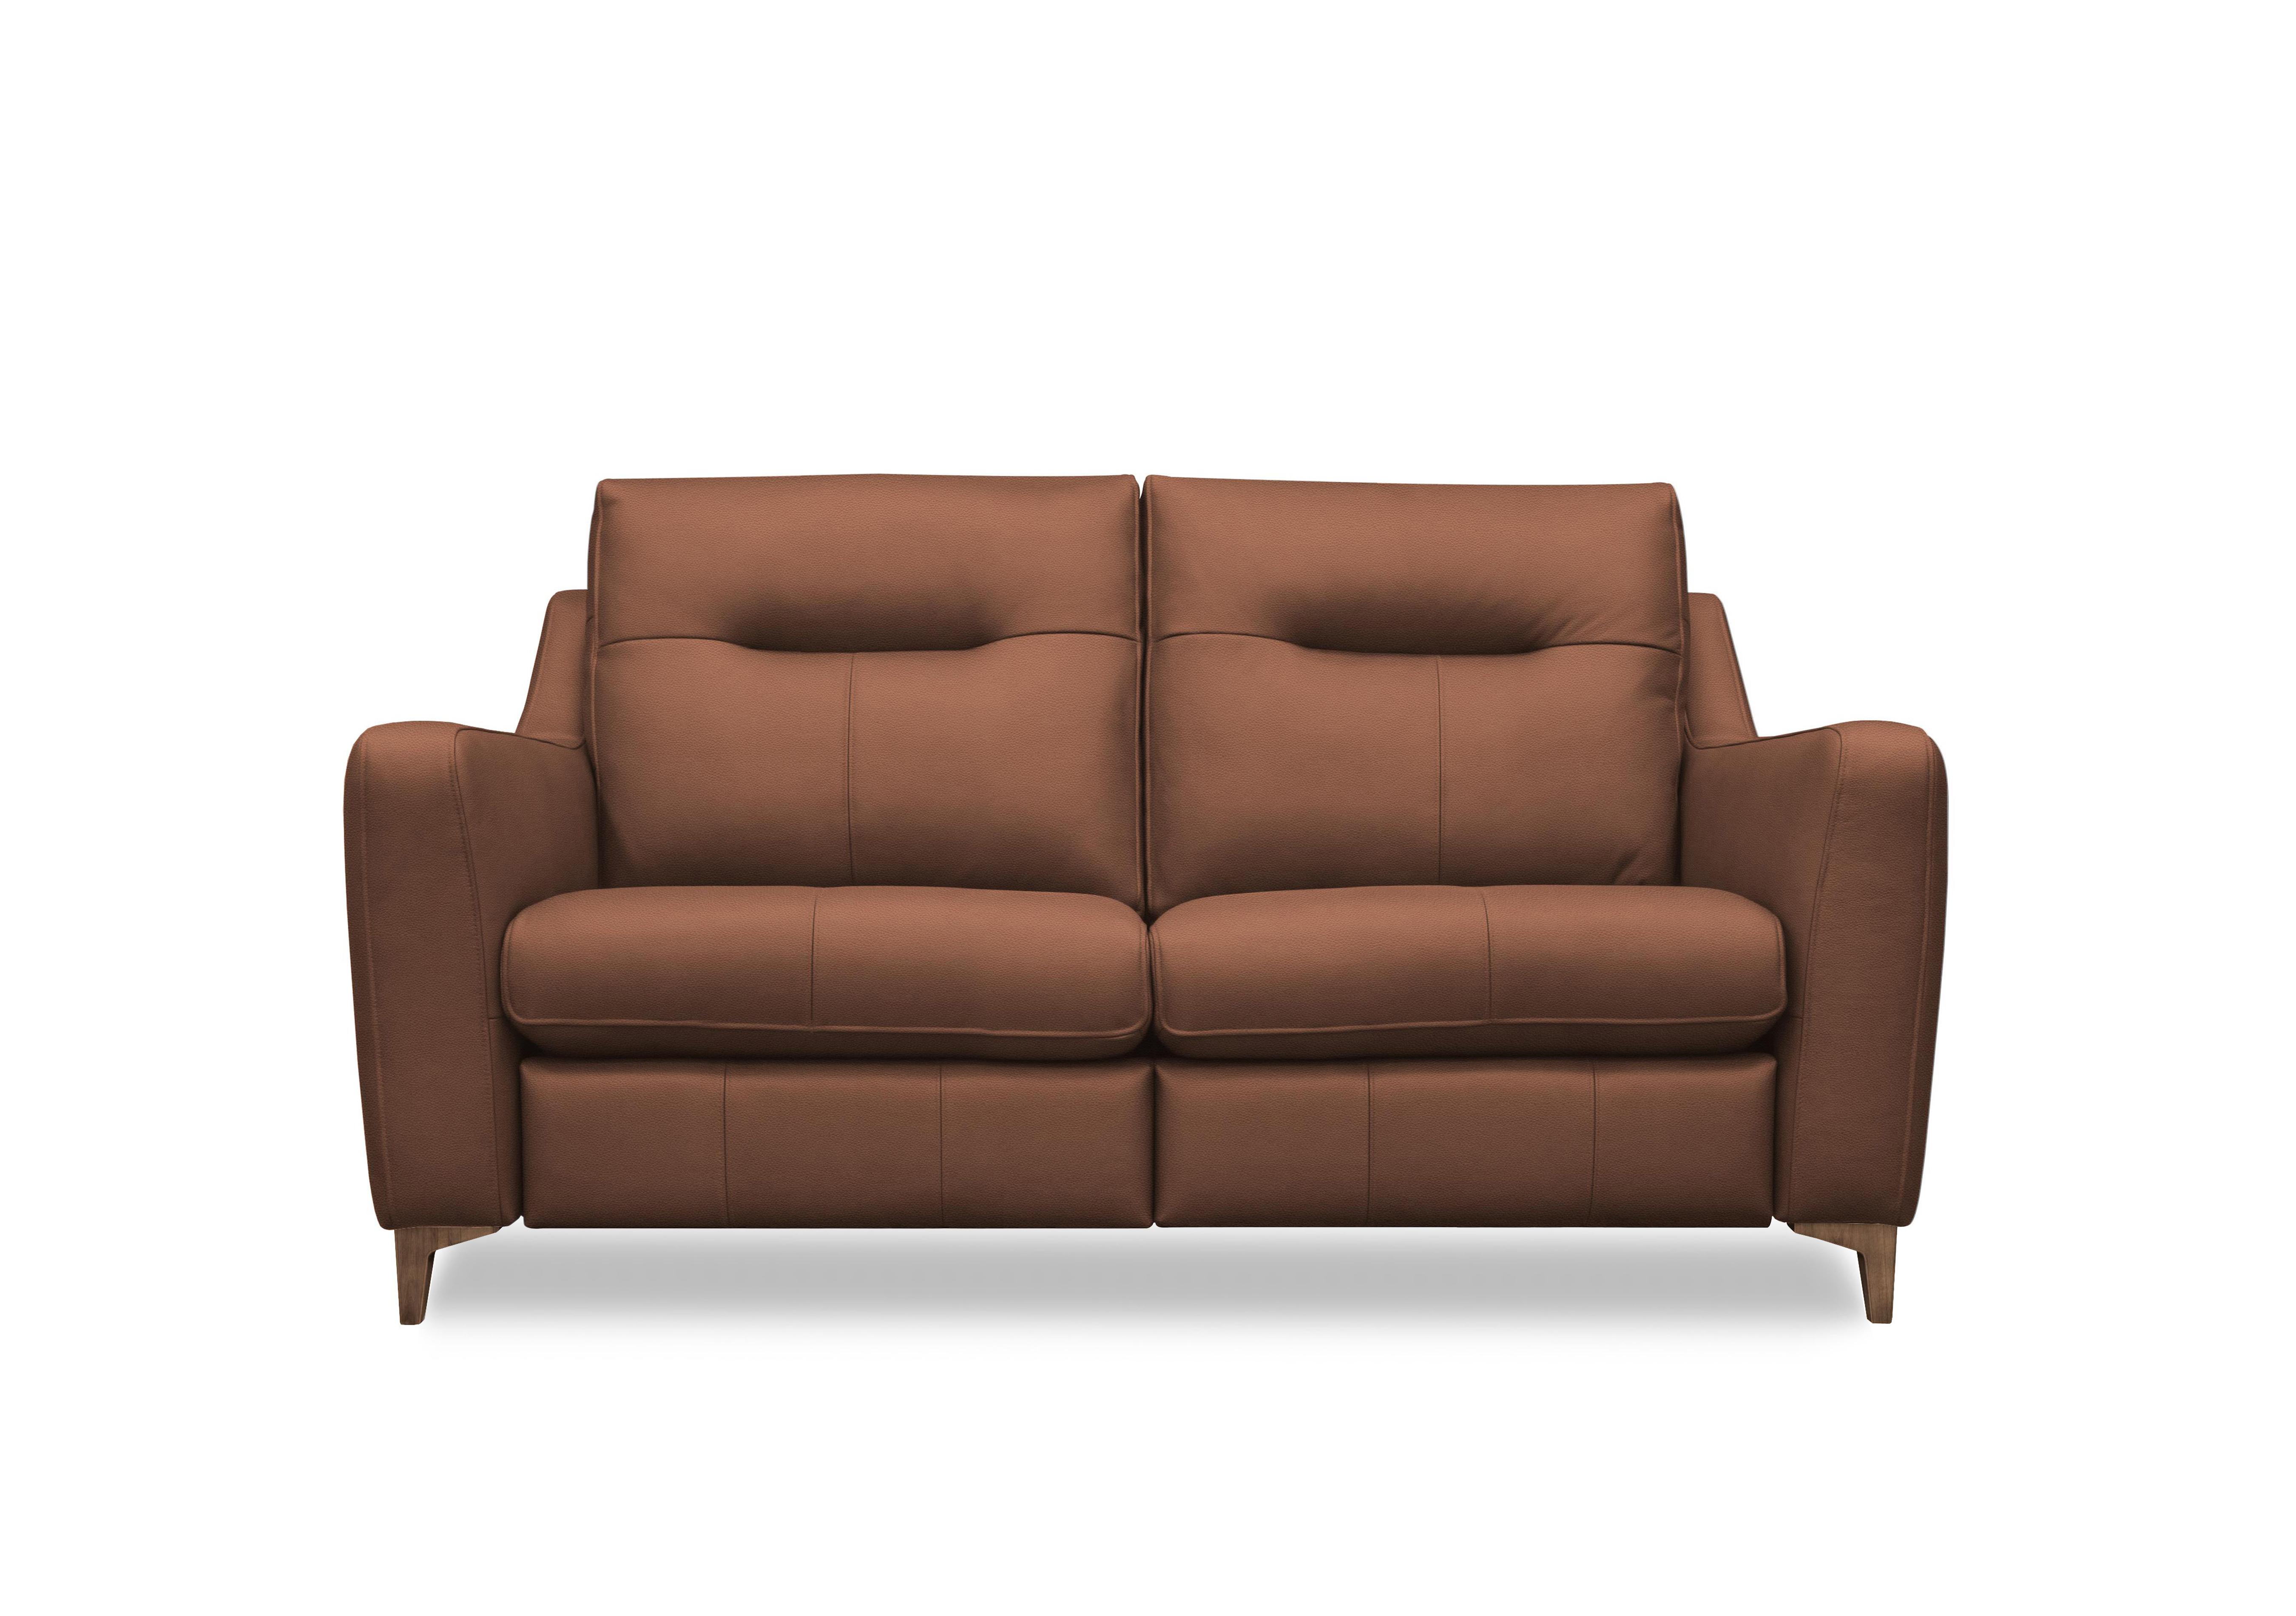 Arlo 2 Seater Leather Sofa in L848 Cambridge Conker Wal Ft on Furniture Village